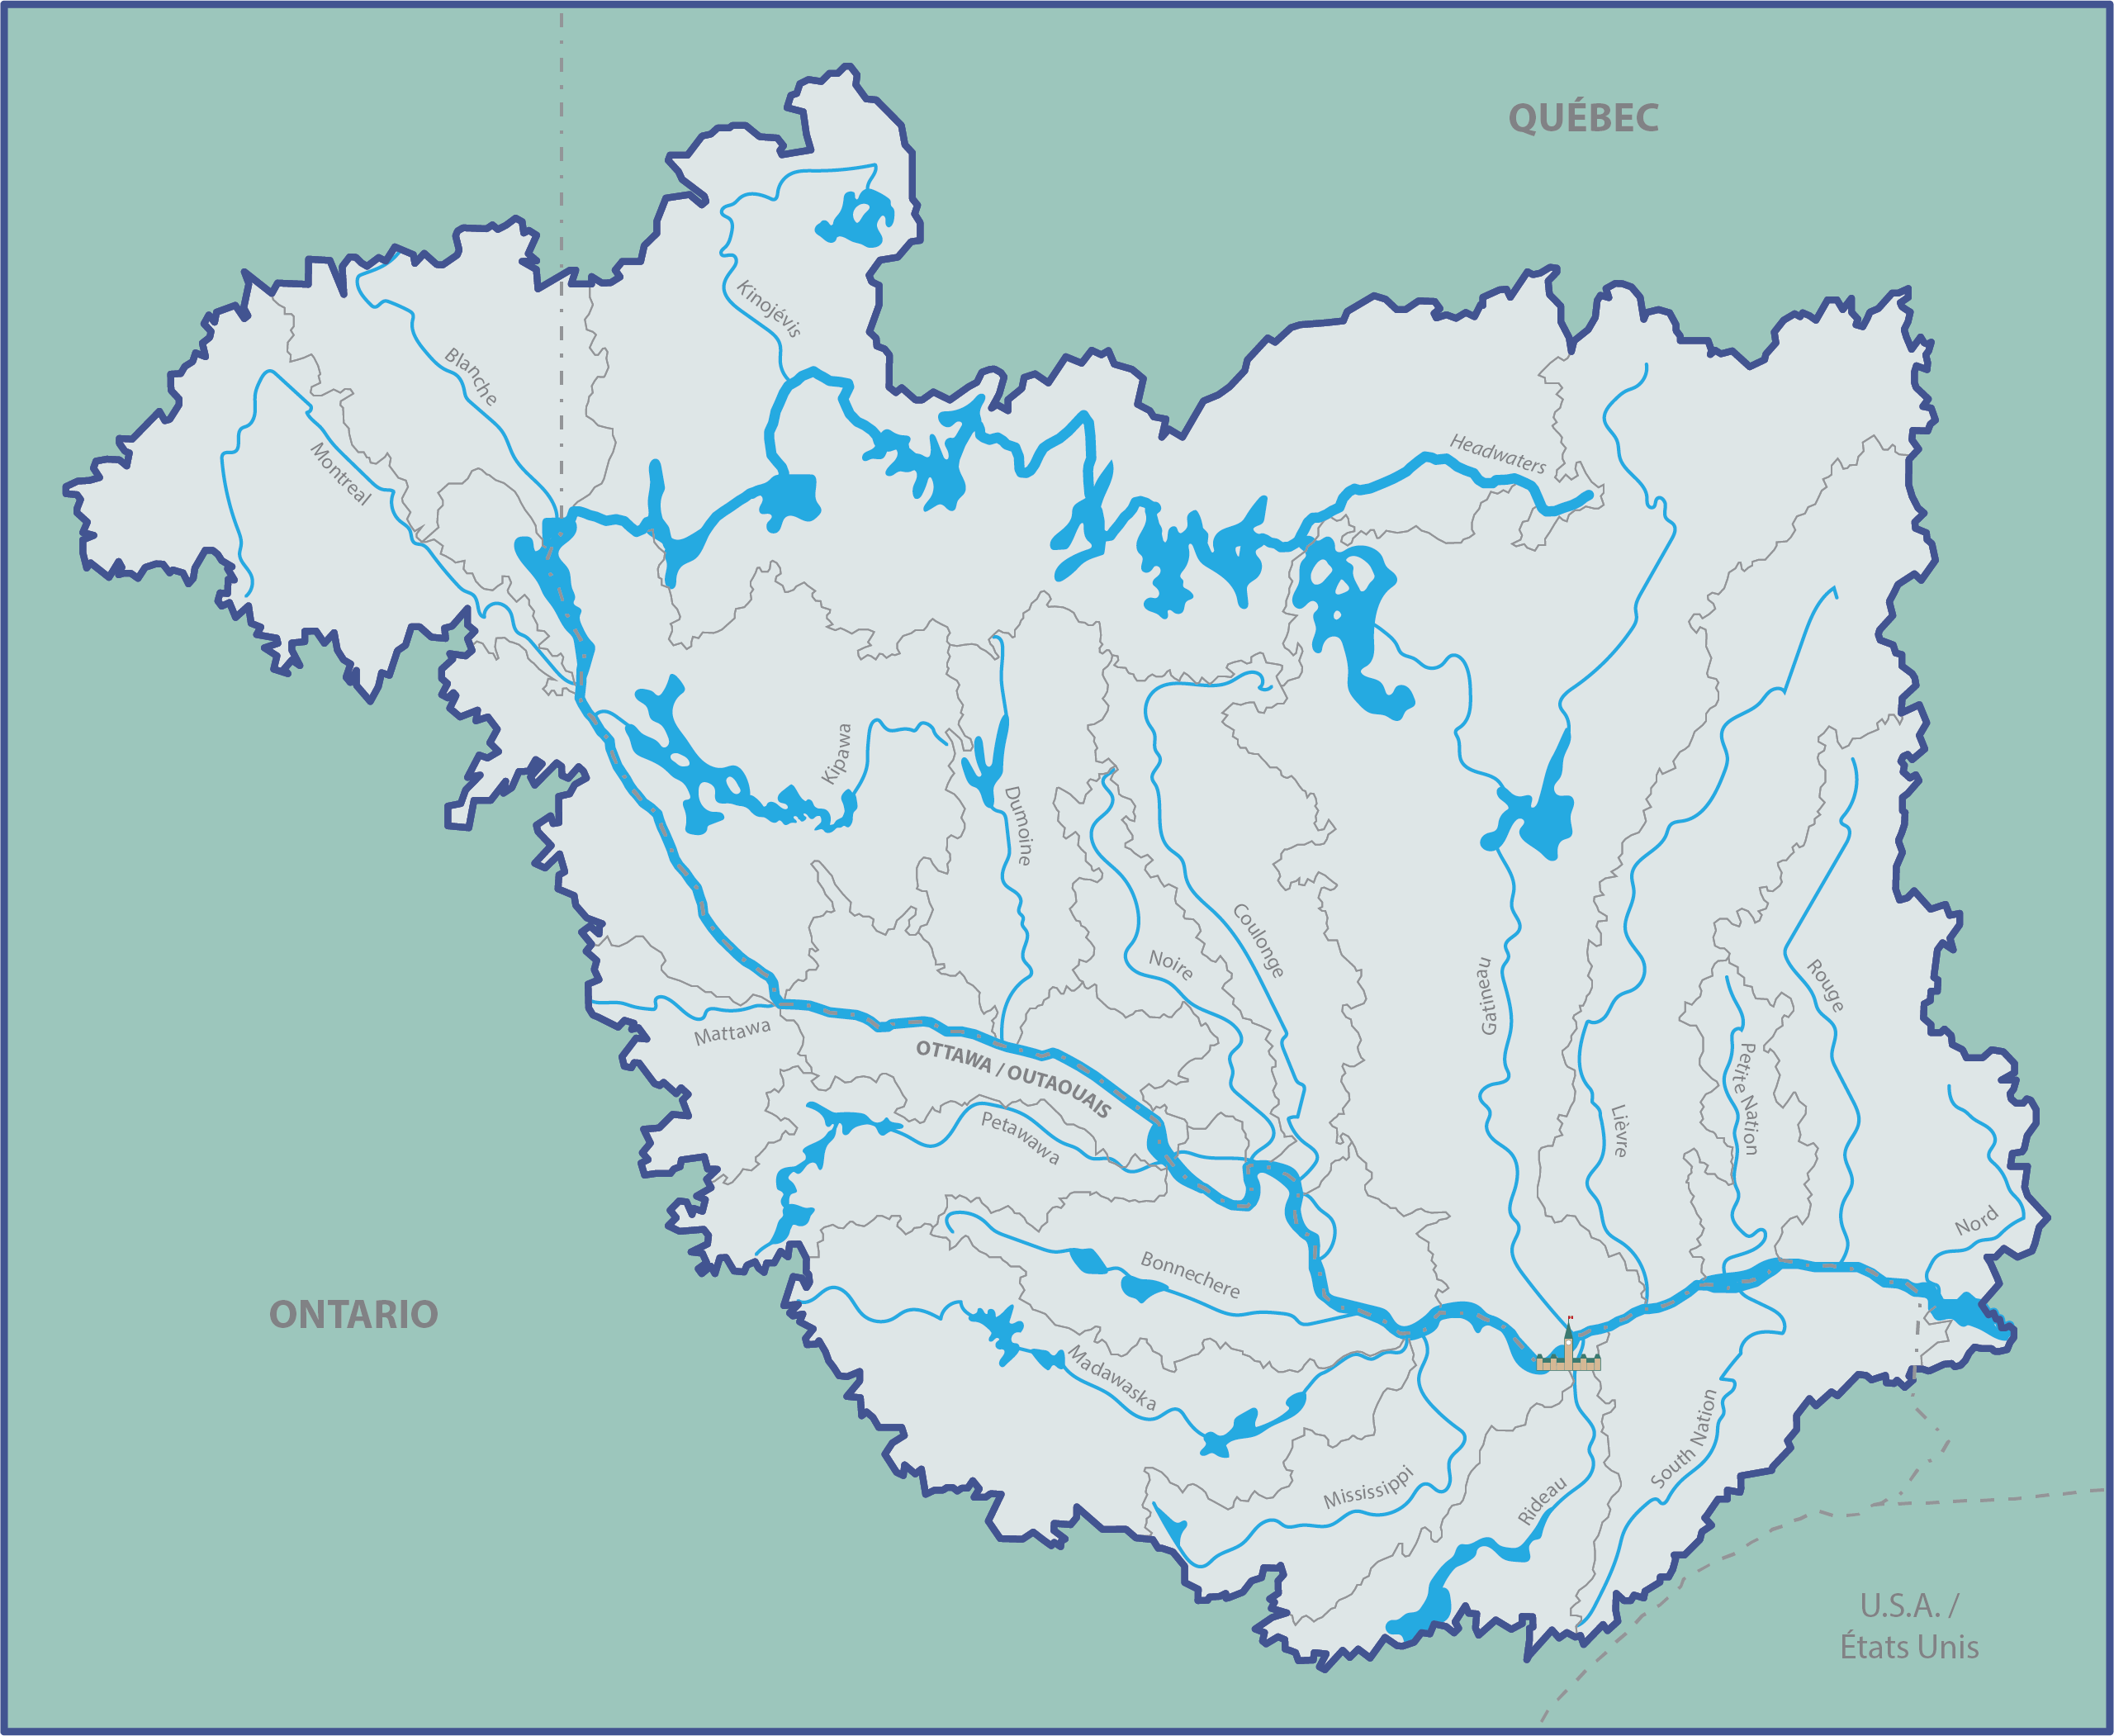 https://eadn-wc01-4092020.nxedge.io/cdn/wp-content/uploads/2021/05/OttawaRiverWatershed_Map_Subwatersheds_TribLabels_ProvFedBorders.png